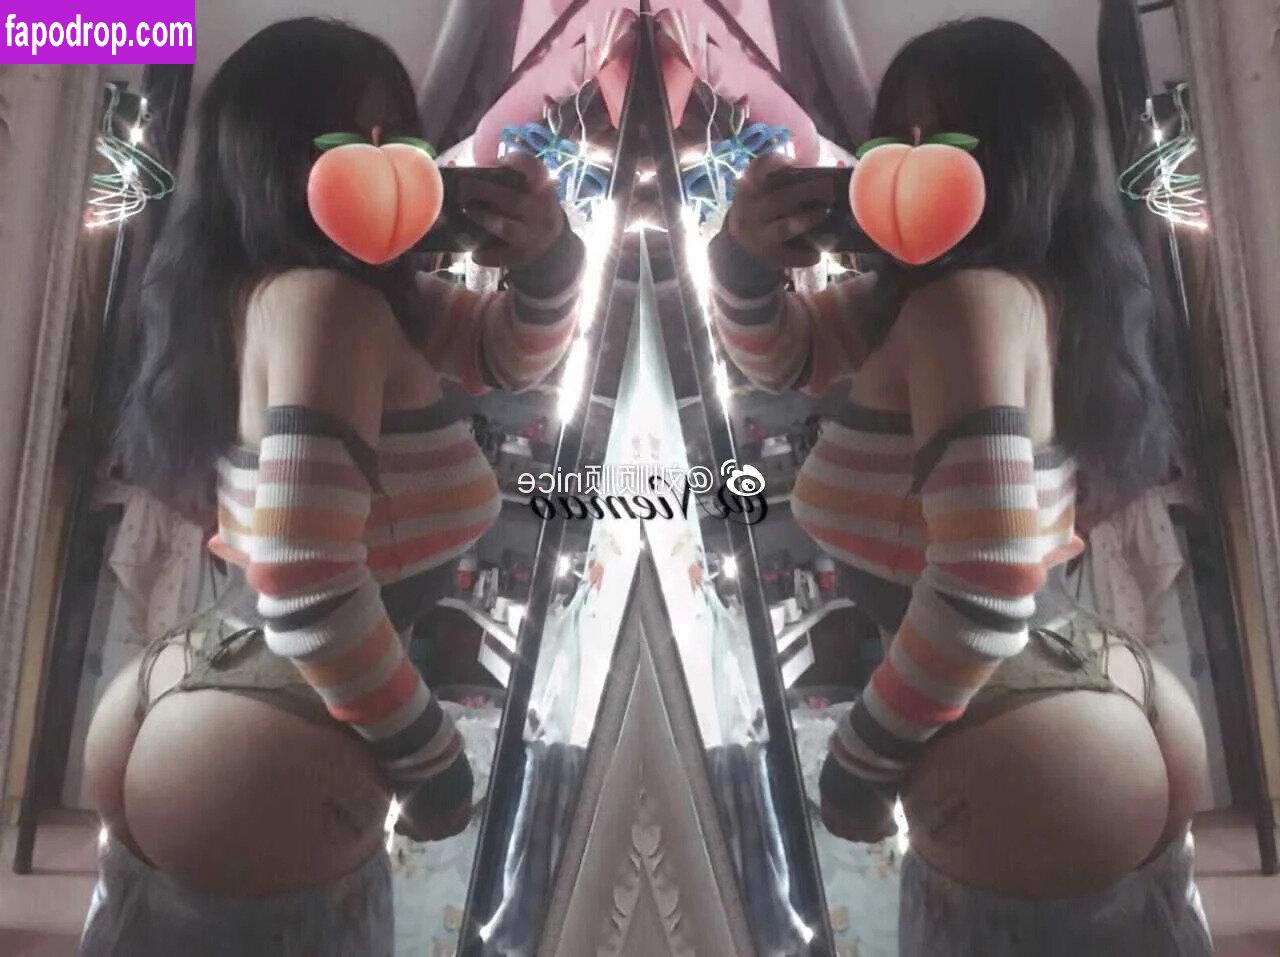 yuxin_cccc / Cynthia / Niemao / Yuxin / cynthiababeee / niemao_babe / 渝欣888 leak of nude photo #0032 from OnlyFans or Patreon